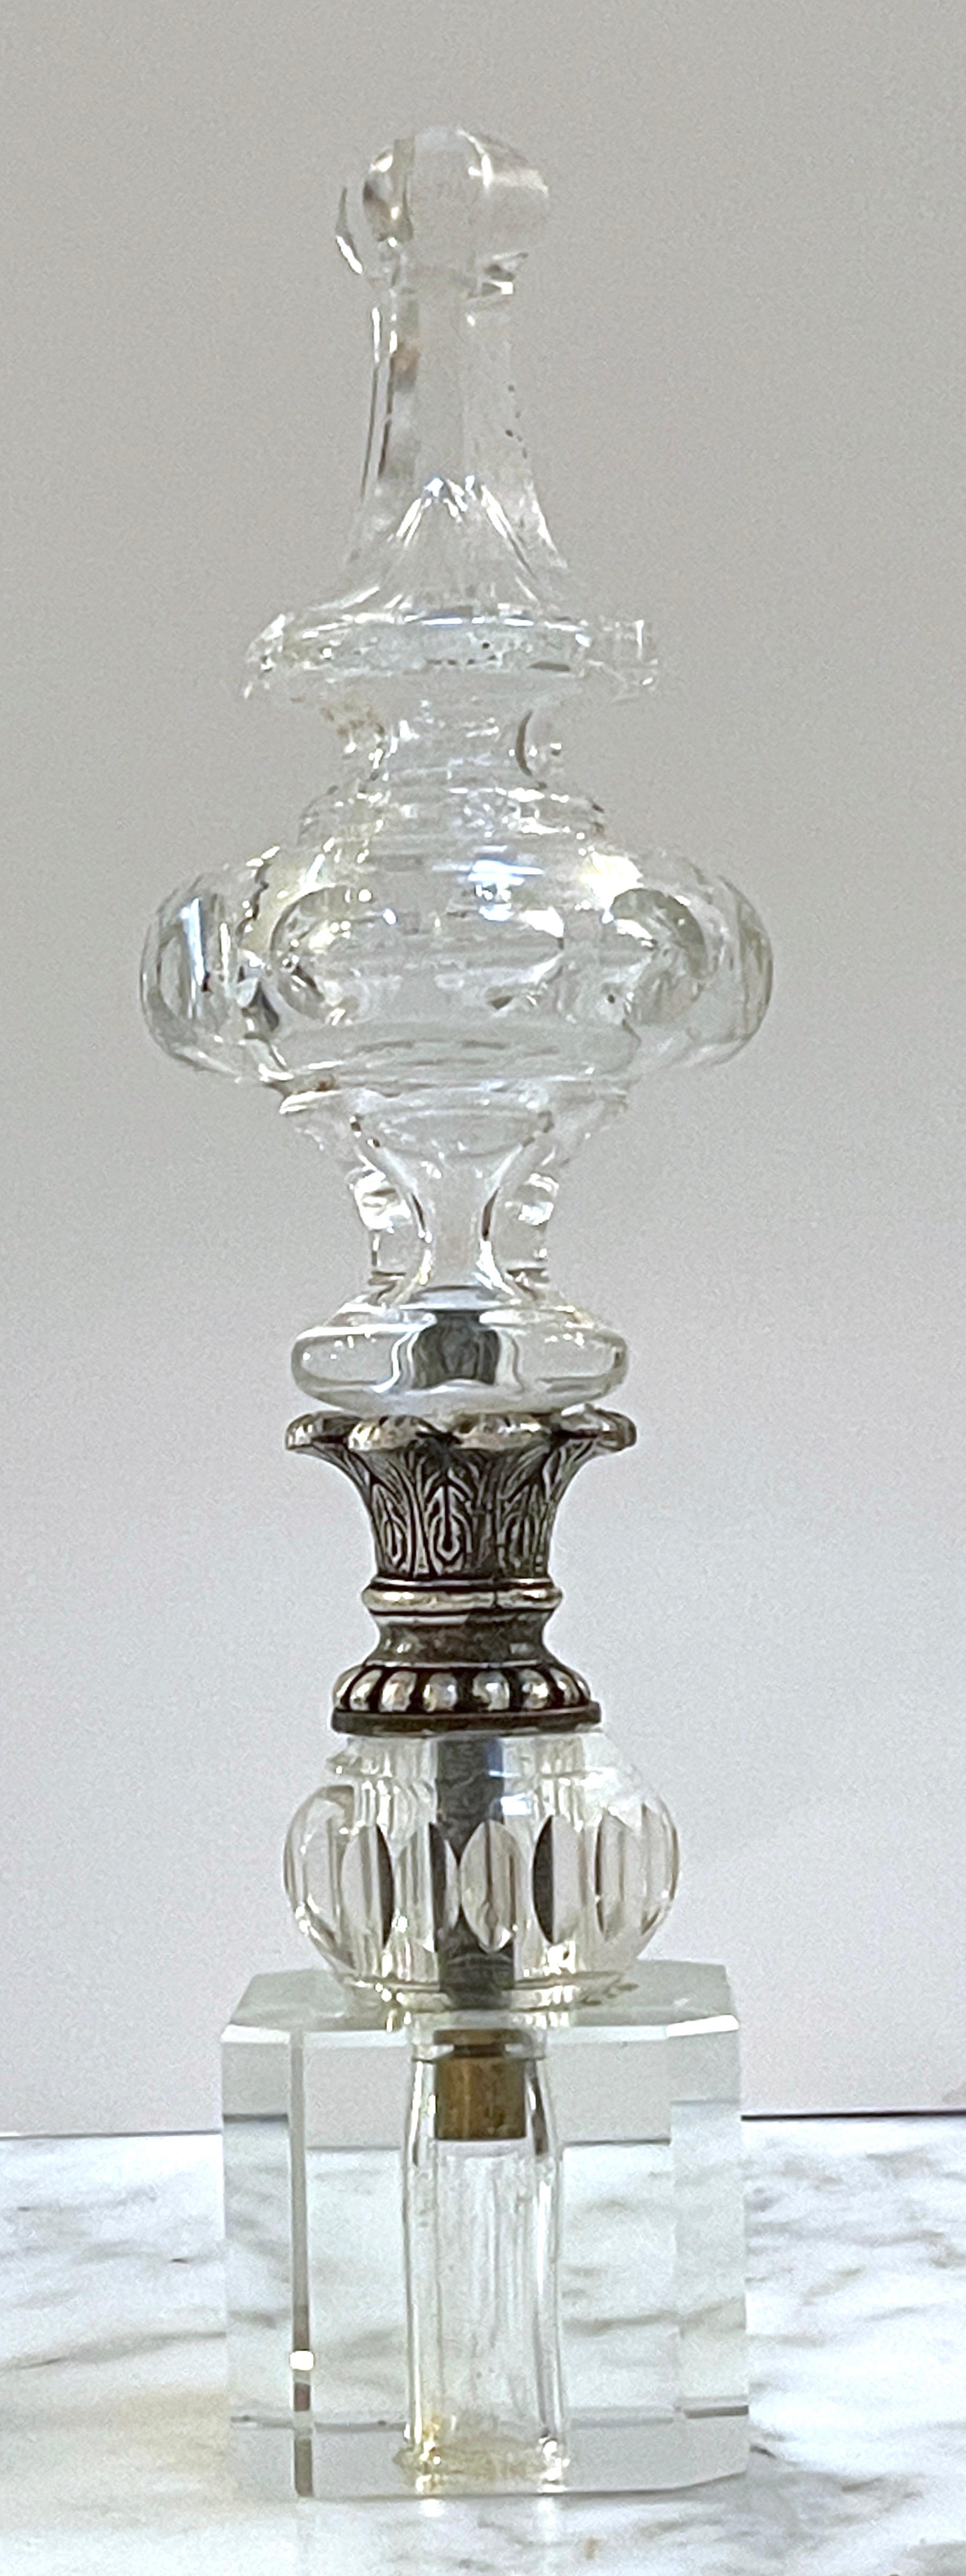 French Neoclassical Silverplated Bronze Mounted Crystal Newel Post 

A stunning French Neoclassical Silverplated Bronze Mounted Crystal Newel Post, a work that combines elegance and craftsmanship. This unique piece features a beautifully shaped